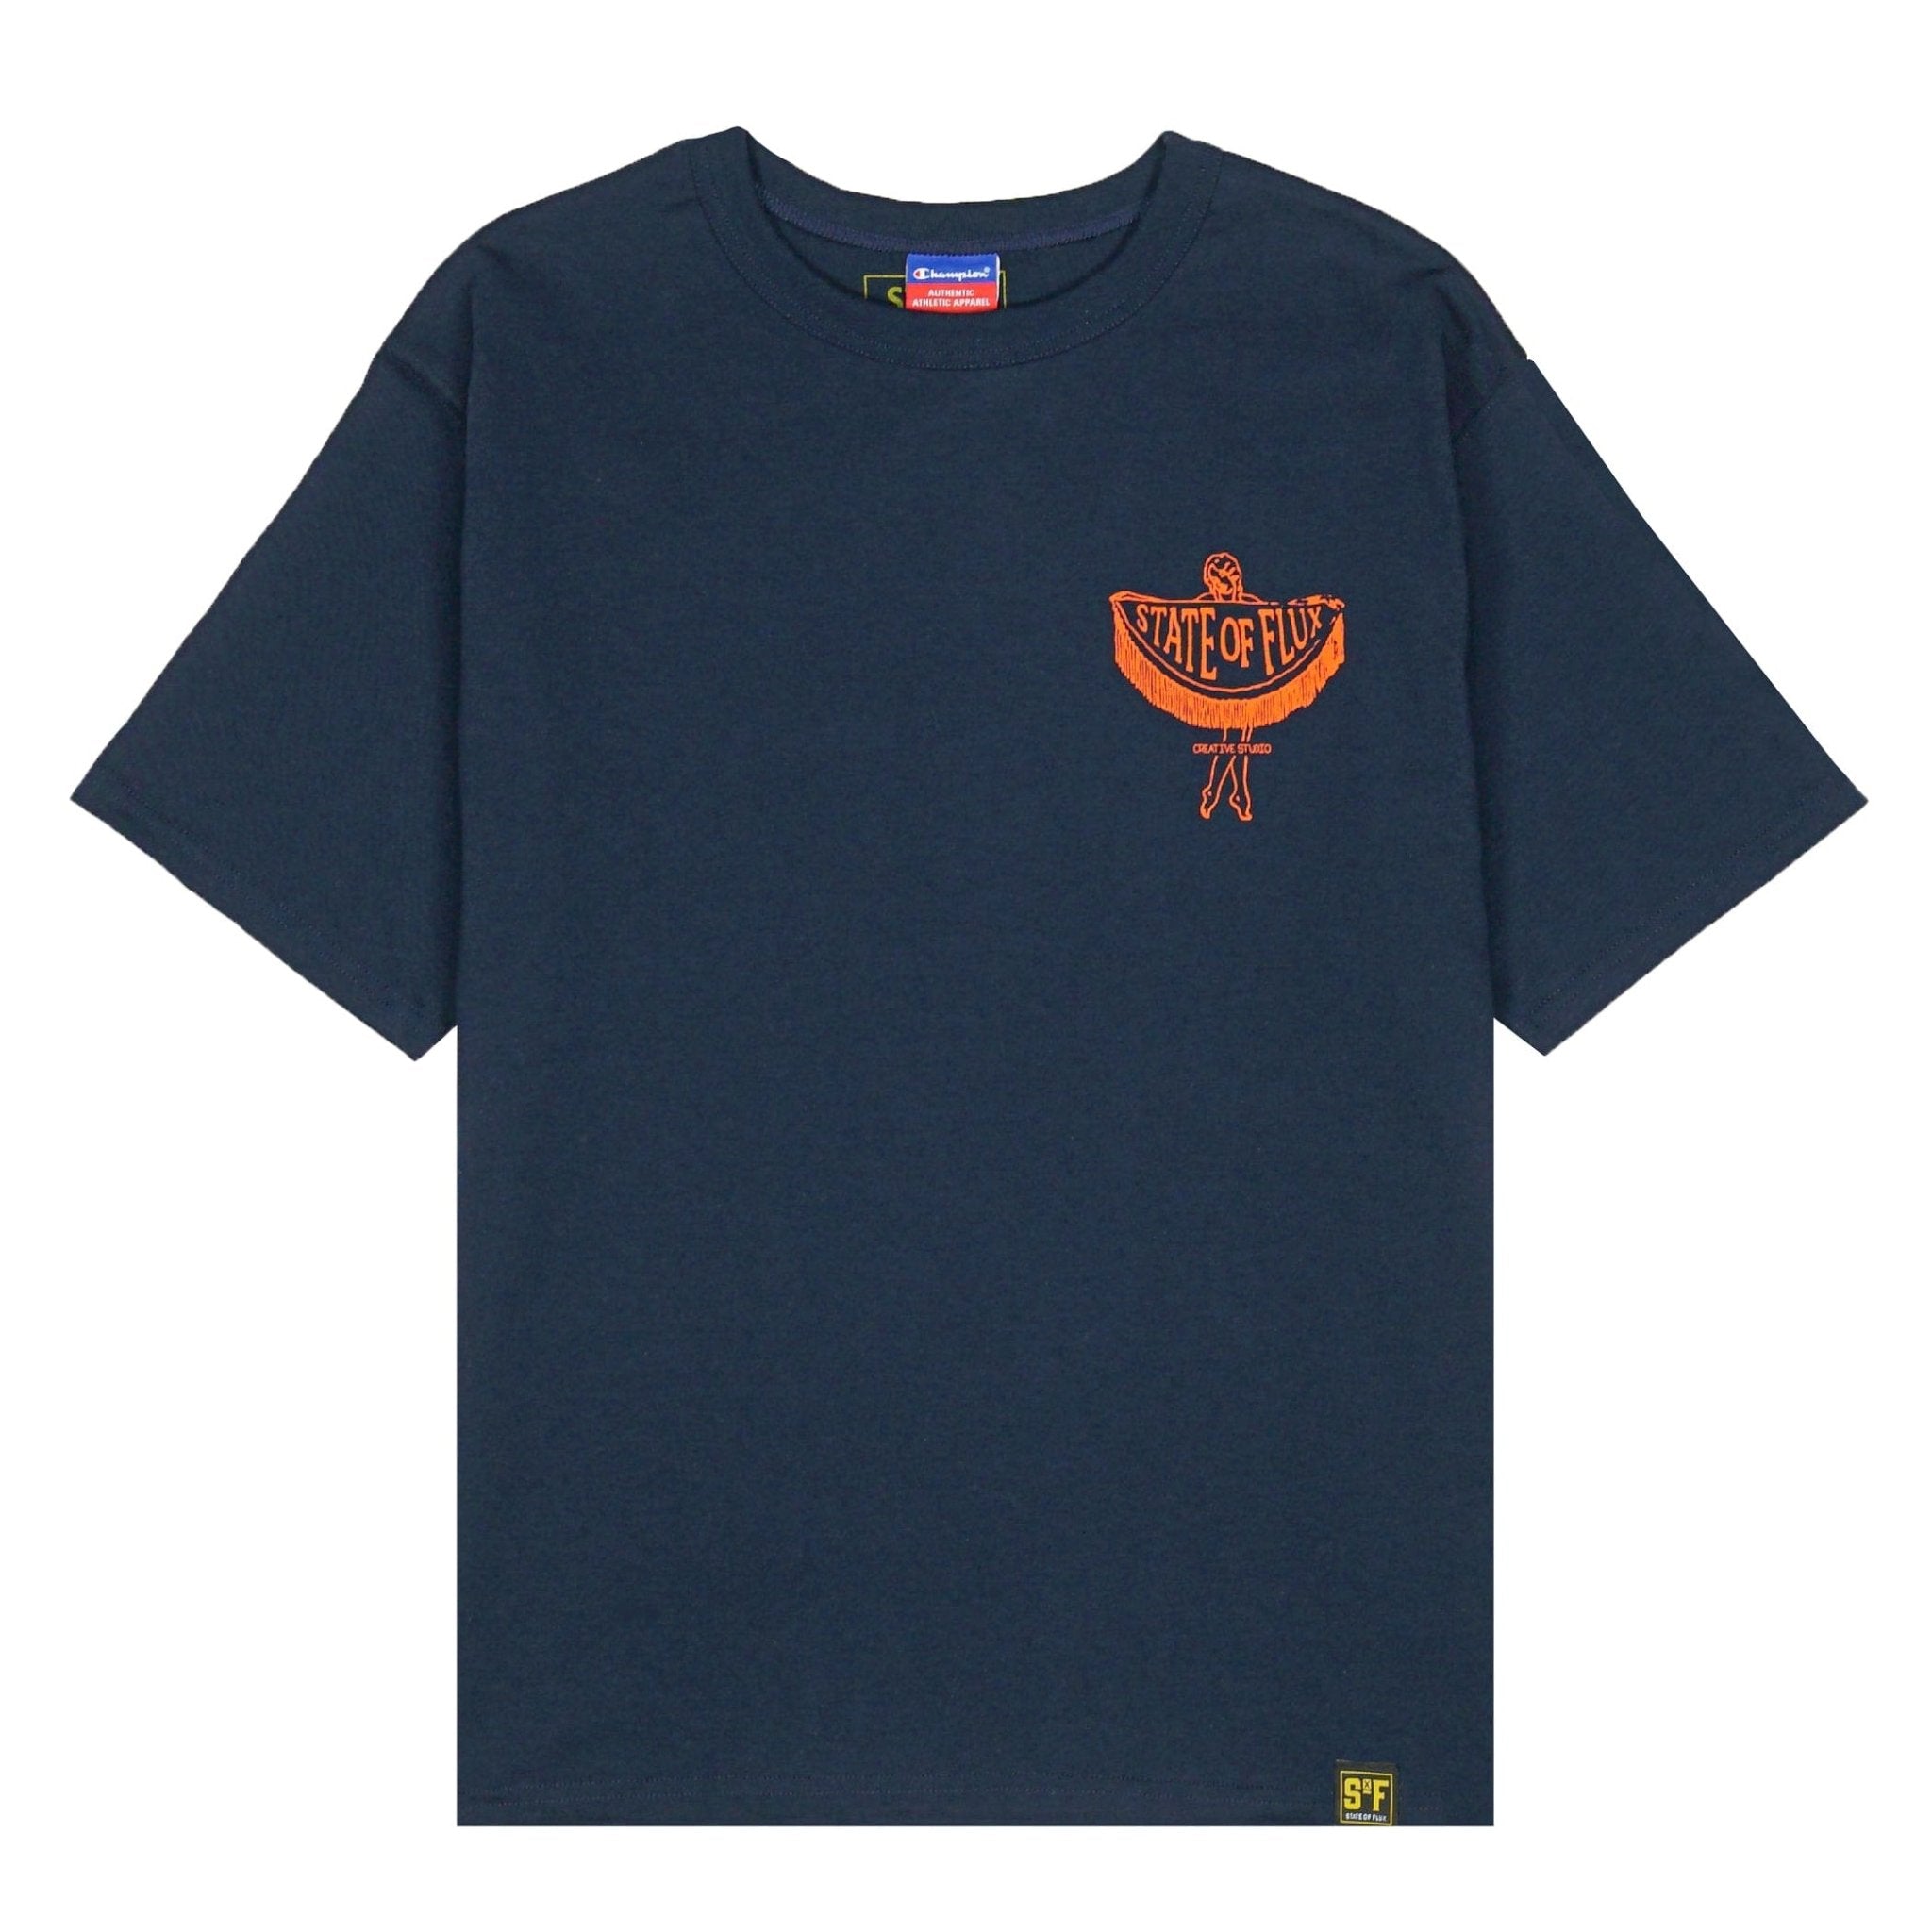 SOF Creative Studio Tee in navy - State Of Flux - State Of Flux